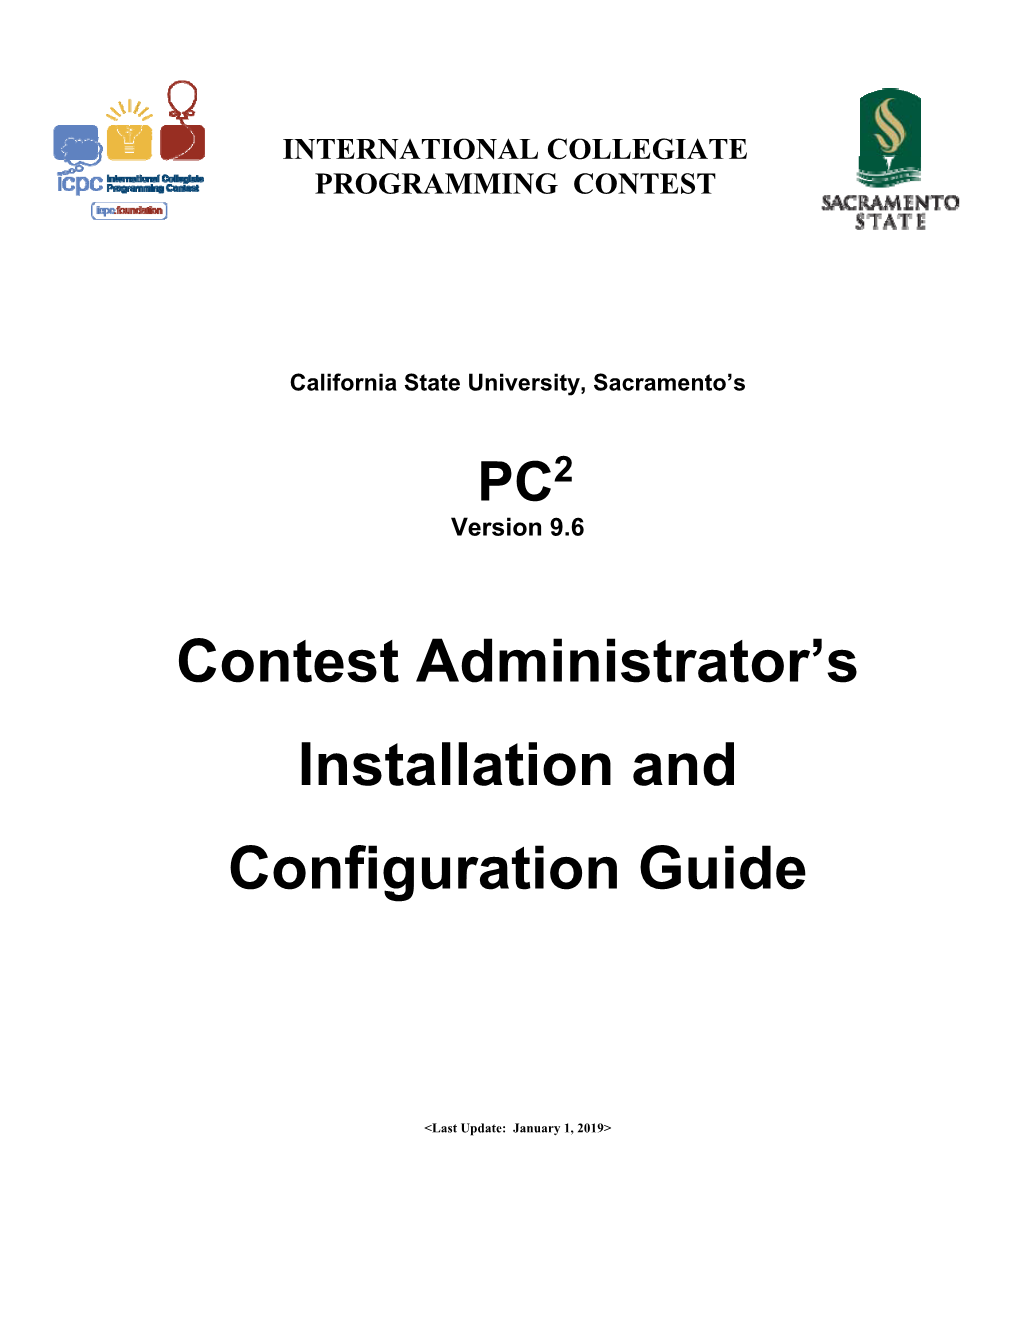 Contest Administrator's Installation and Configuration Guide